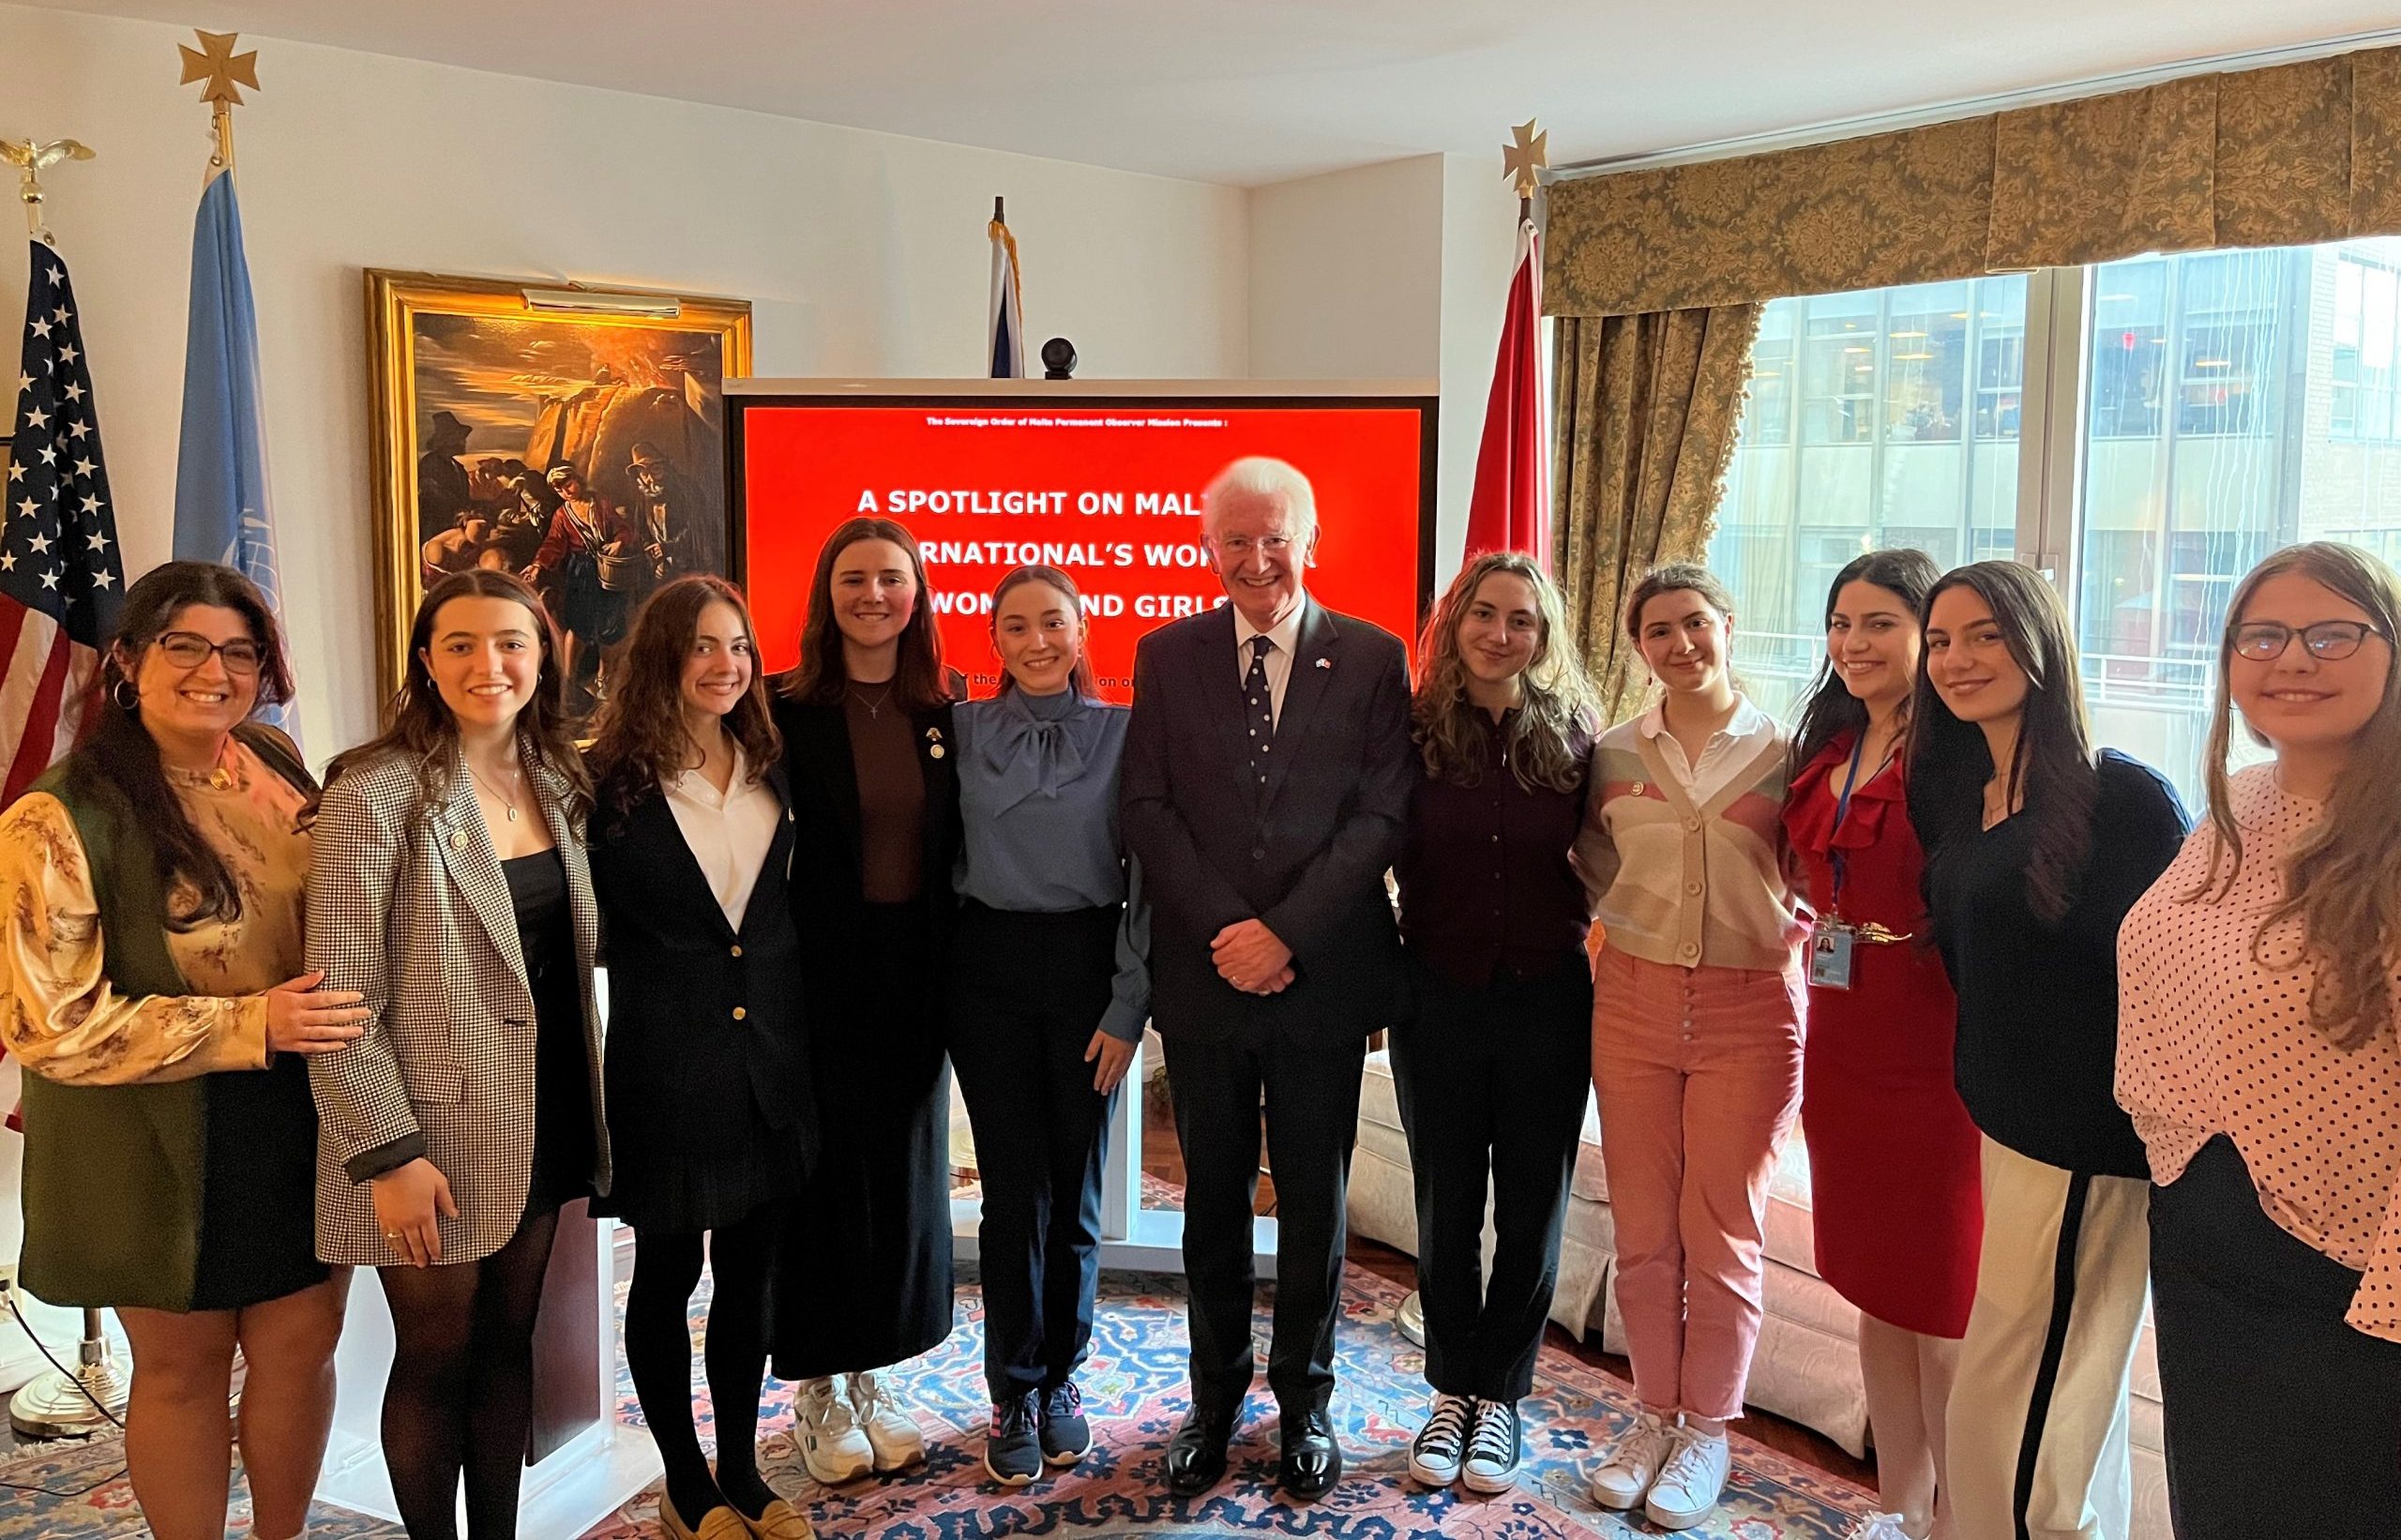 H.E. Ambassador Paul Beresford-Hill welcomed the Girls Delegation from the Greek Orthodox Archdiocese of America